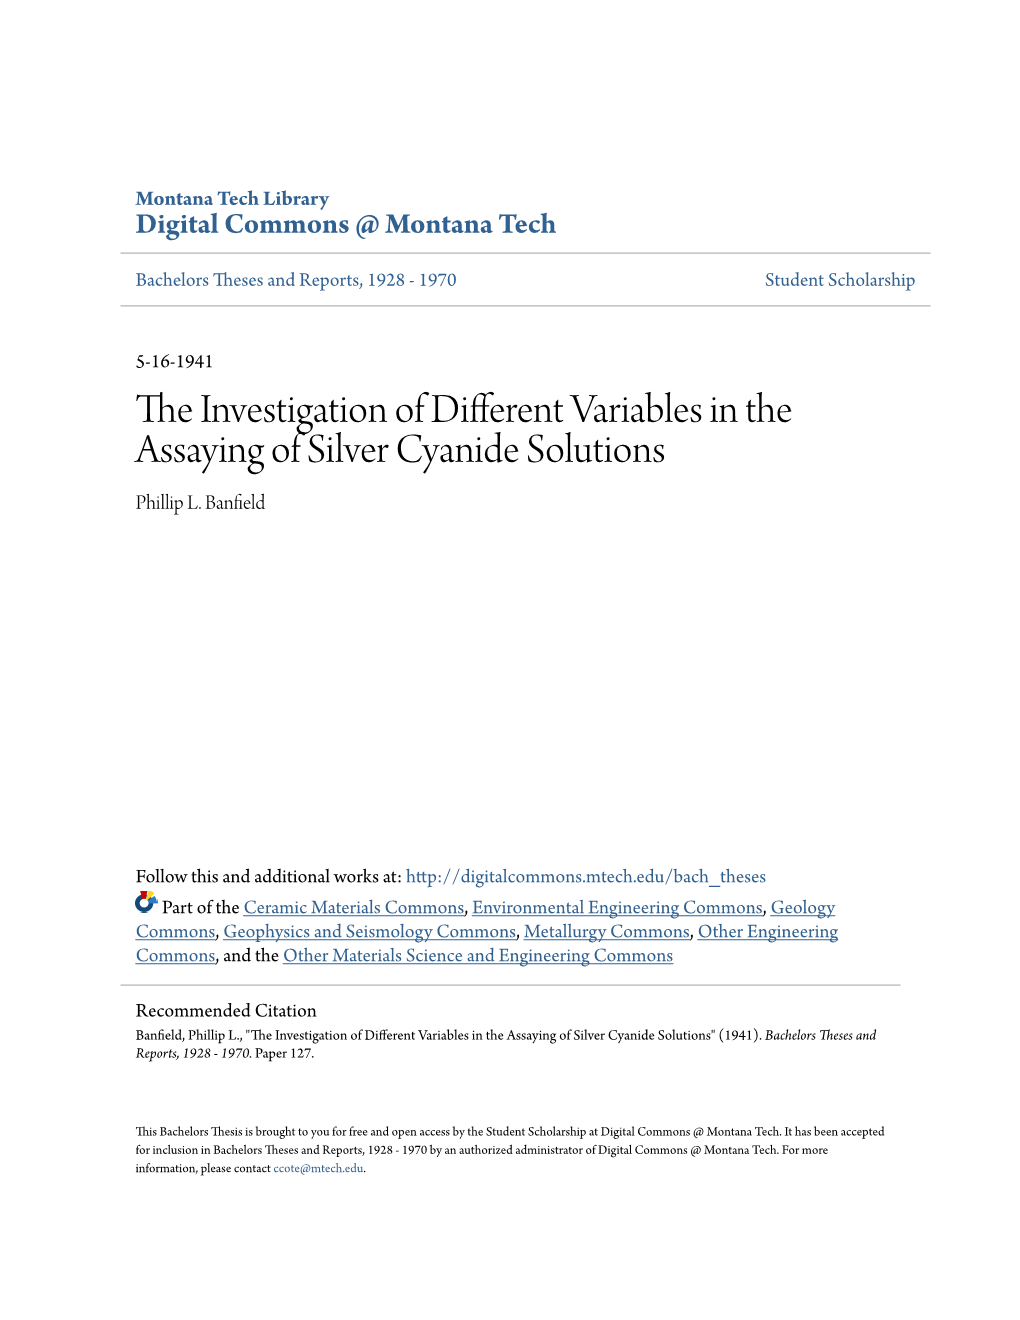 The Investigation of Different Variables in the Assaying of Silver Cyanide Solutions